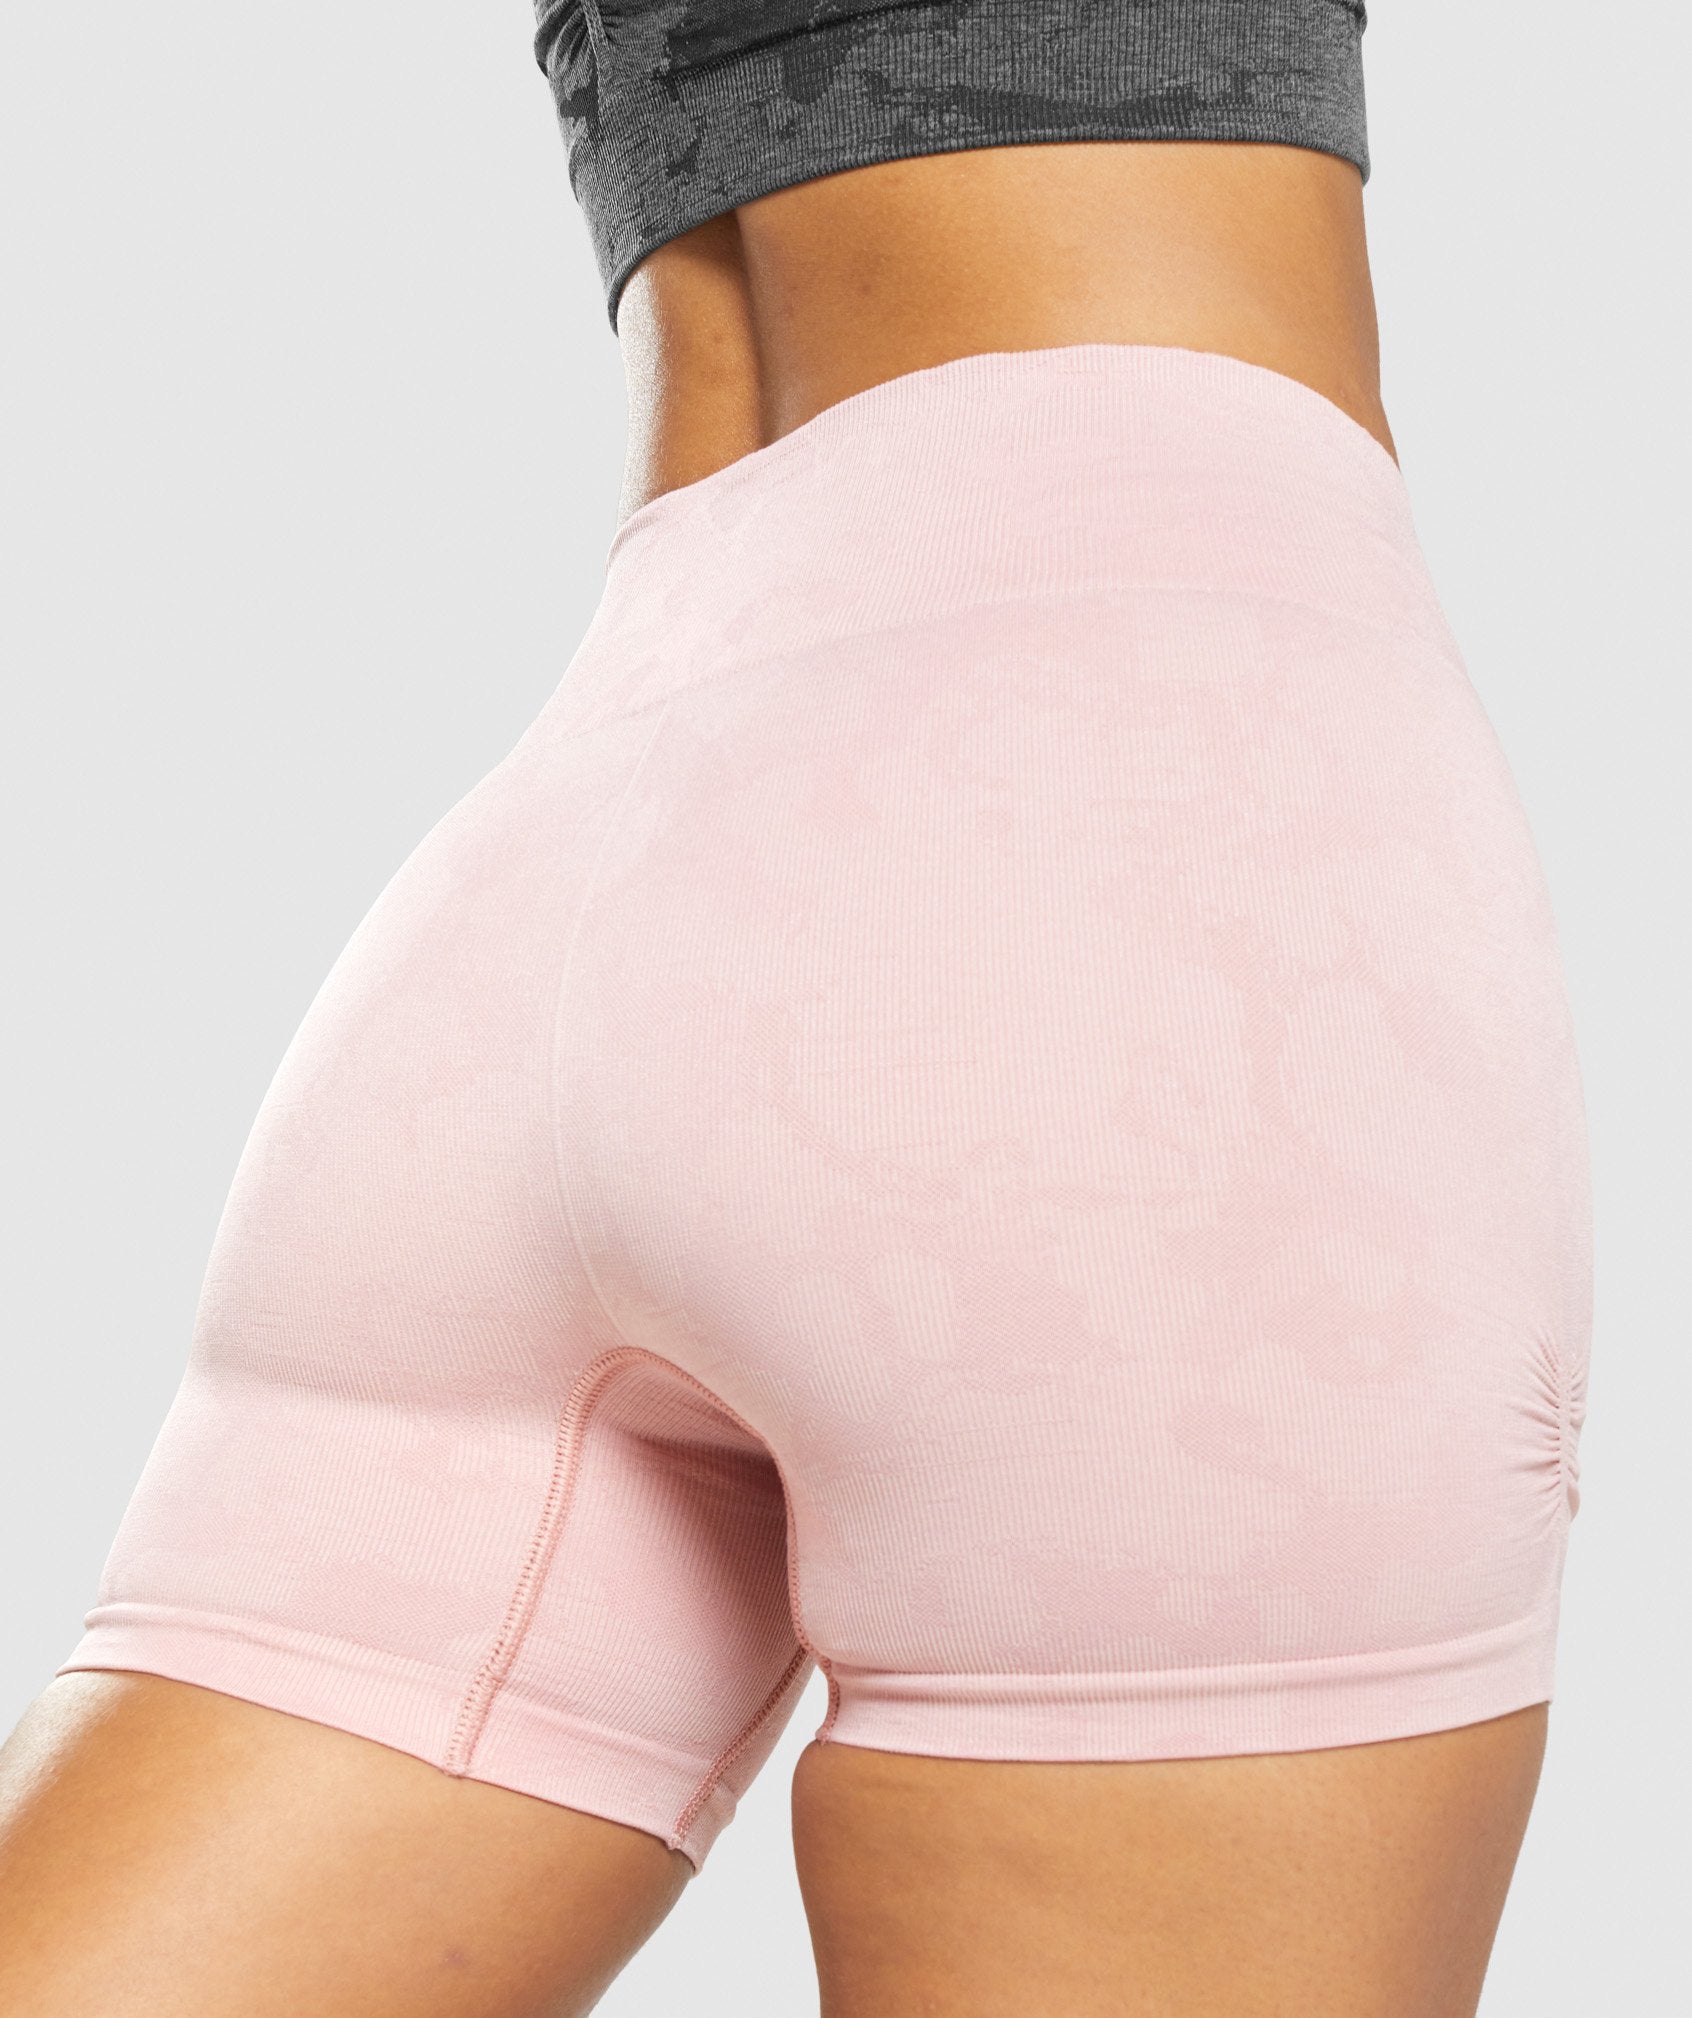 Adapt Camo Seamless Shorts in Light Pink